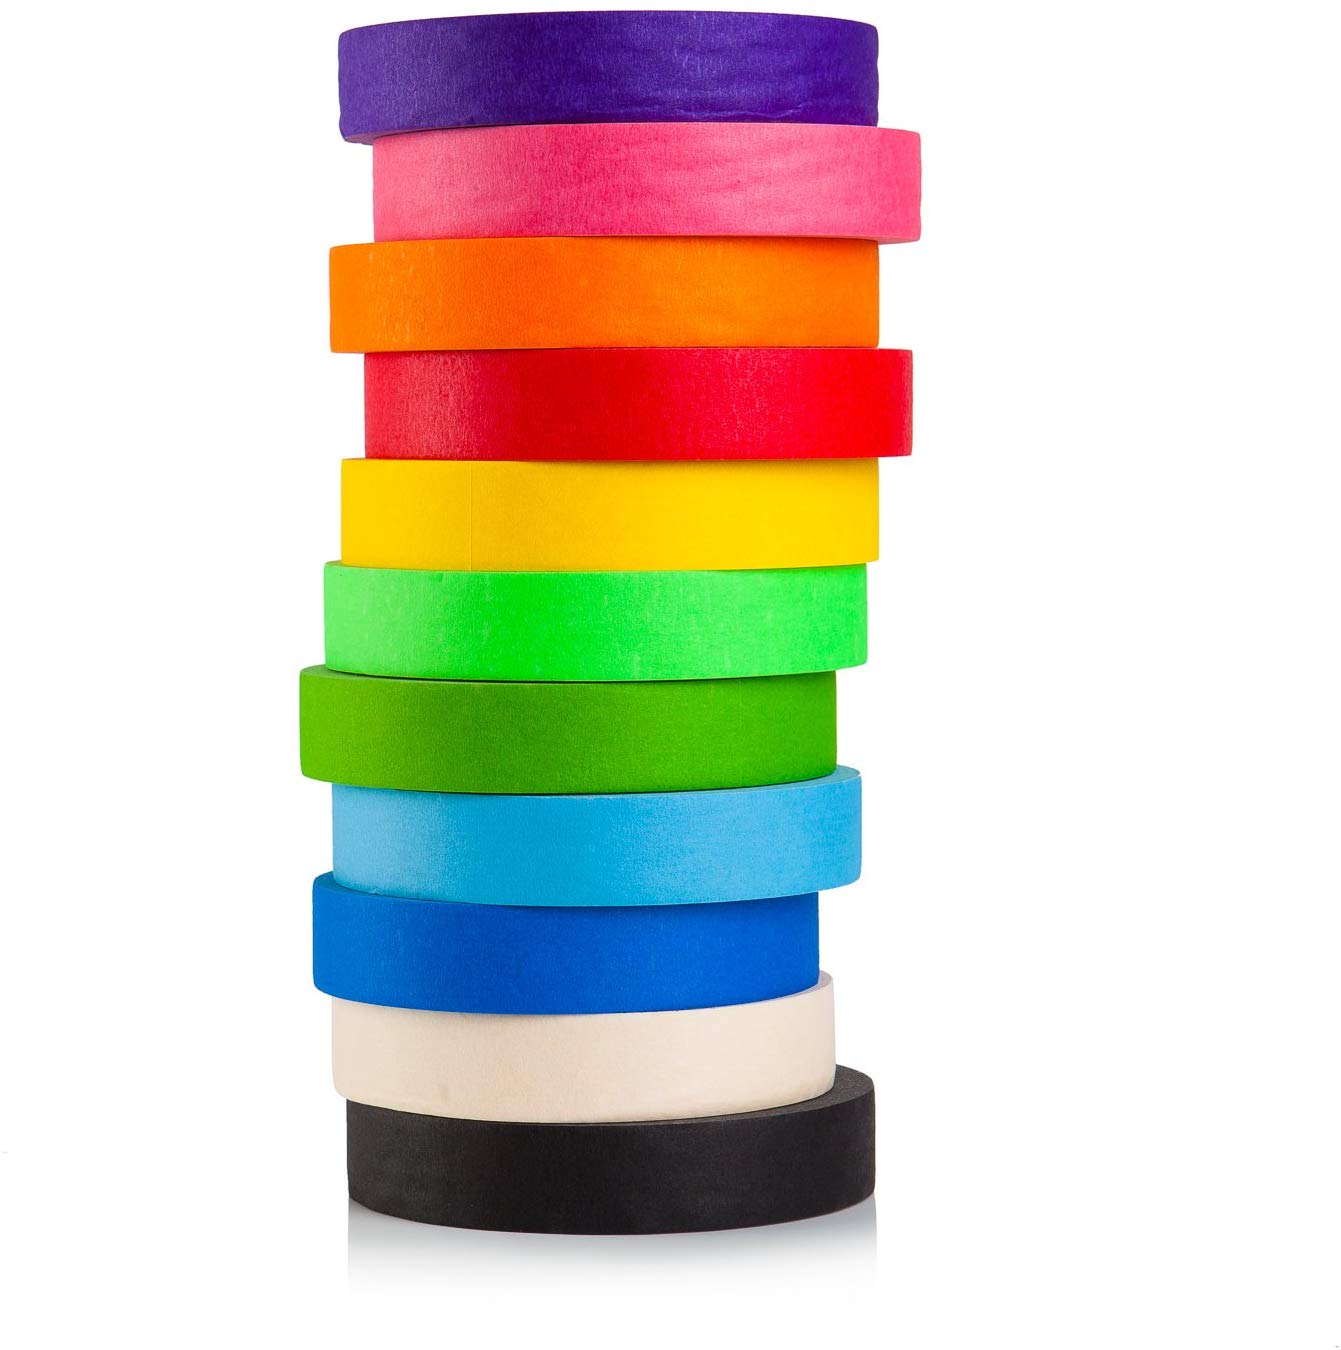 Colored Masking Tape - 11 Pack of 1 inch x 60yd Extra Large Rolls - 660 yards of Rainbow Color Craft Paper Tape